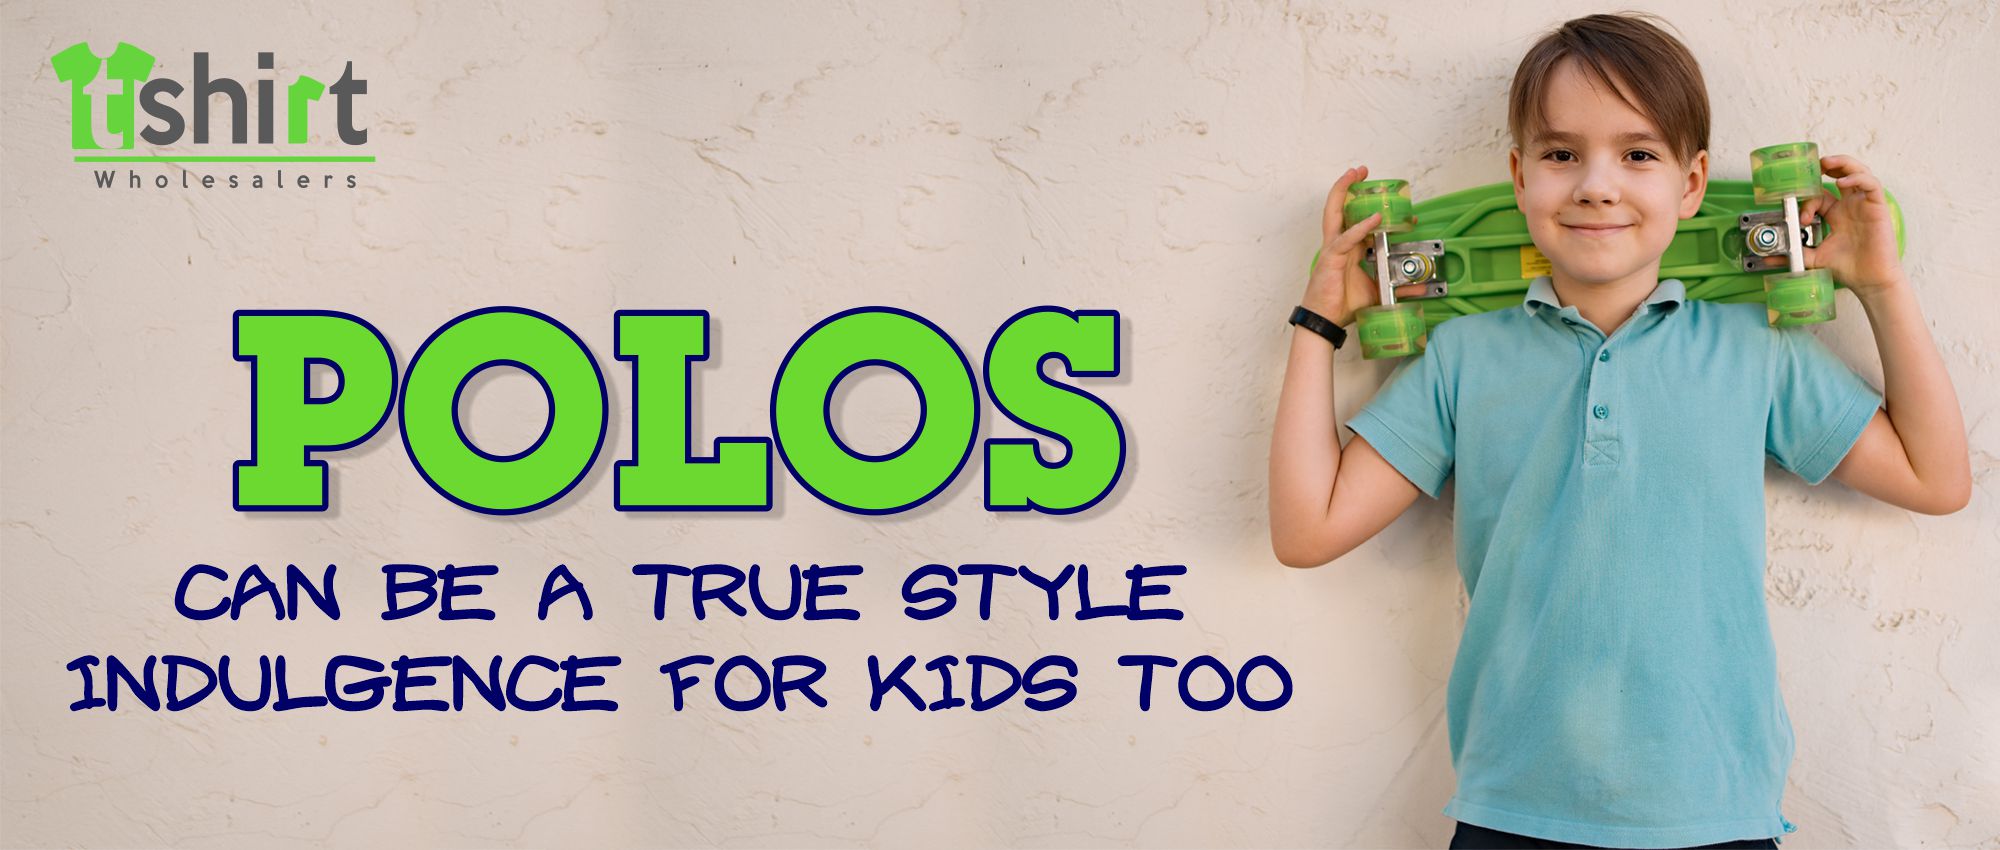 POLOS CAN BE A TRUE STYLE INDULGENCE FOR KIDS TOO